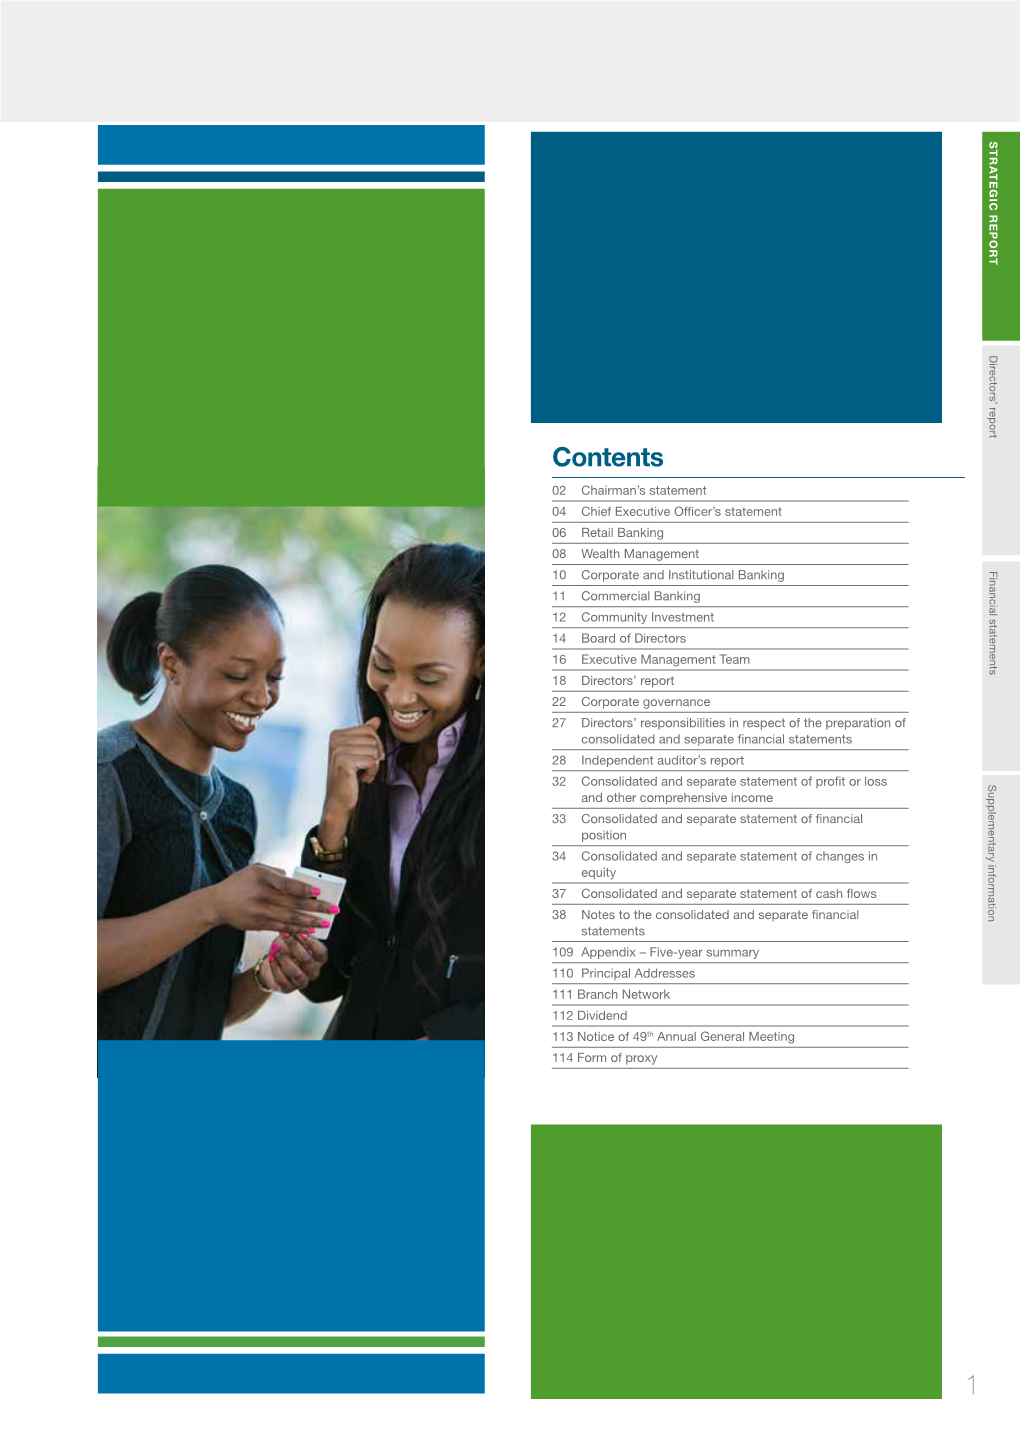 Standard Chartered Bank Annual Report 2019